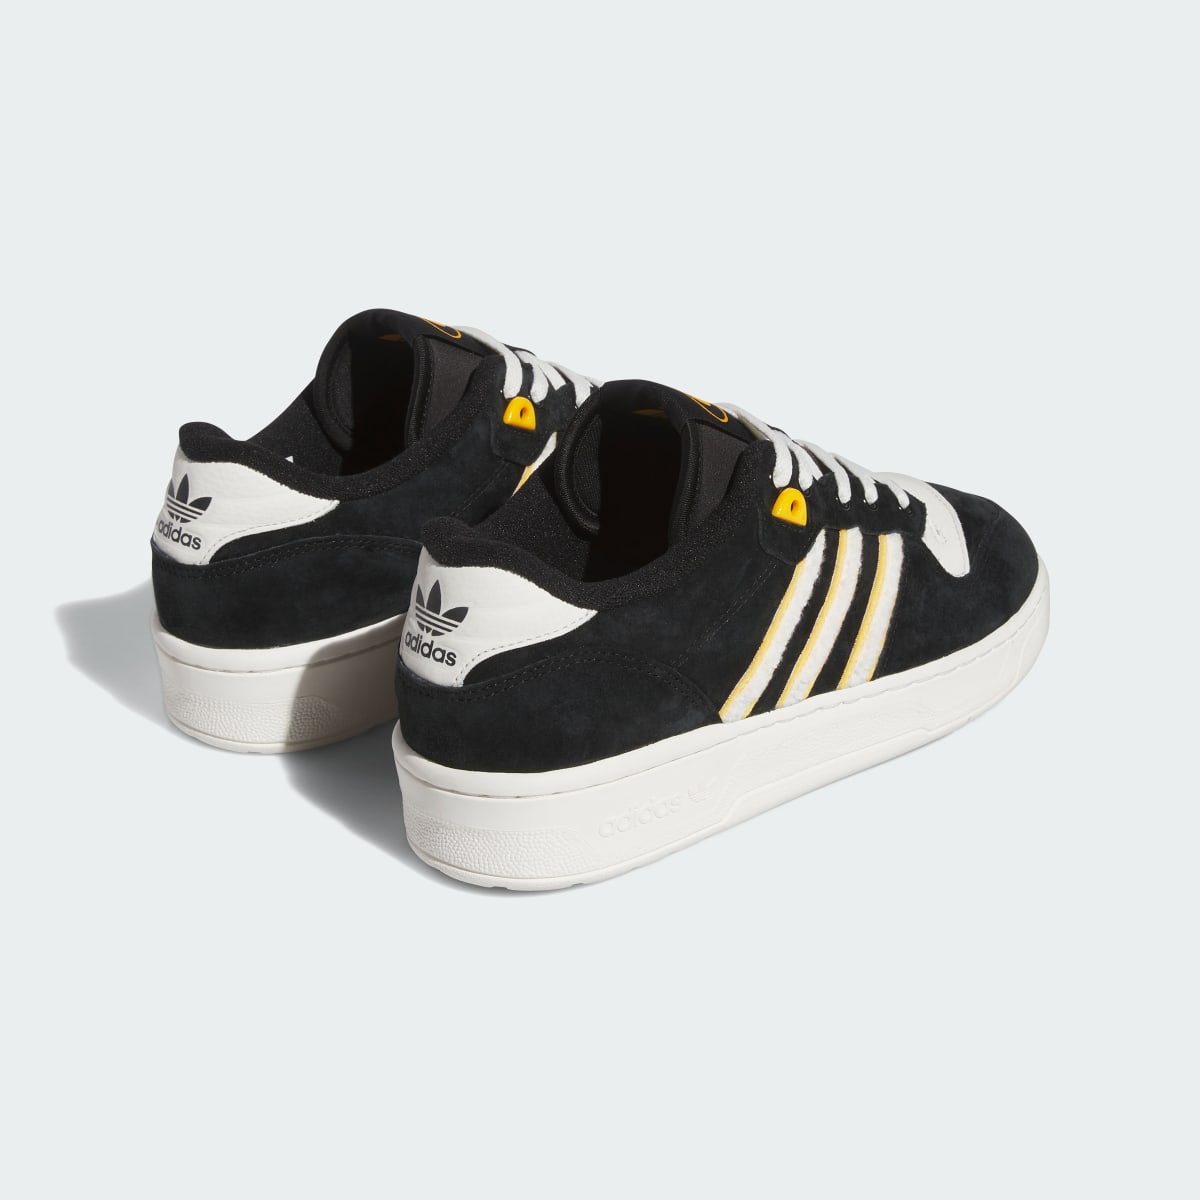 Adidas Grambling State Rivalry Low Shoes. 6